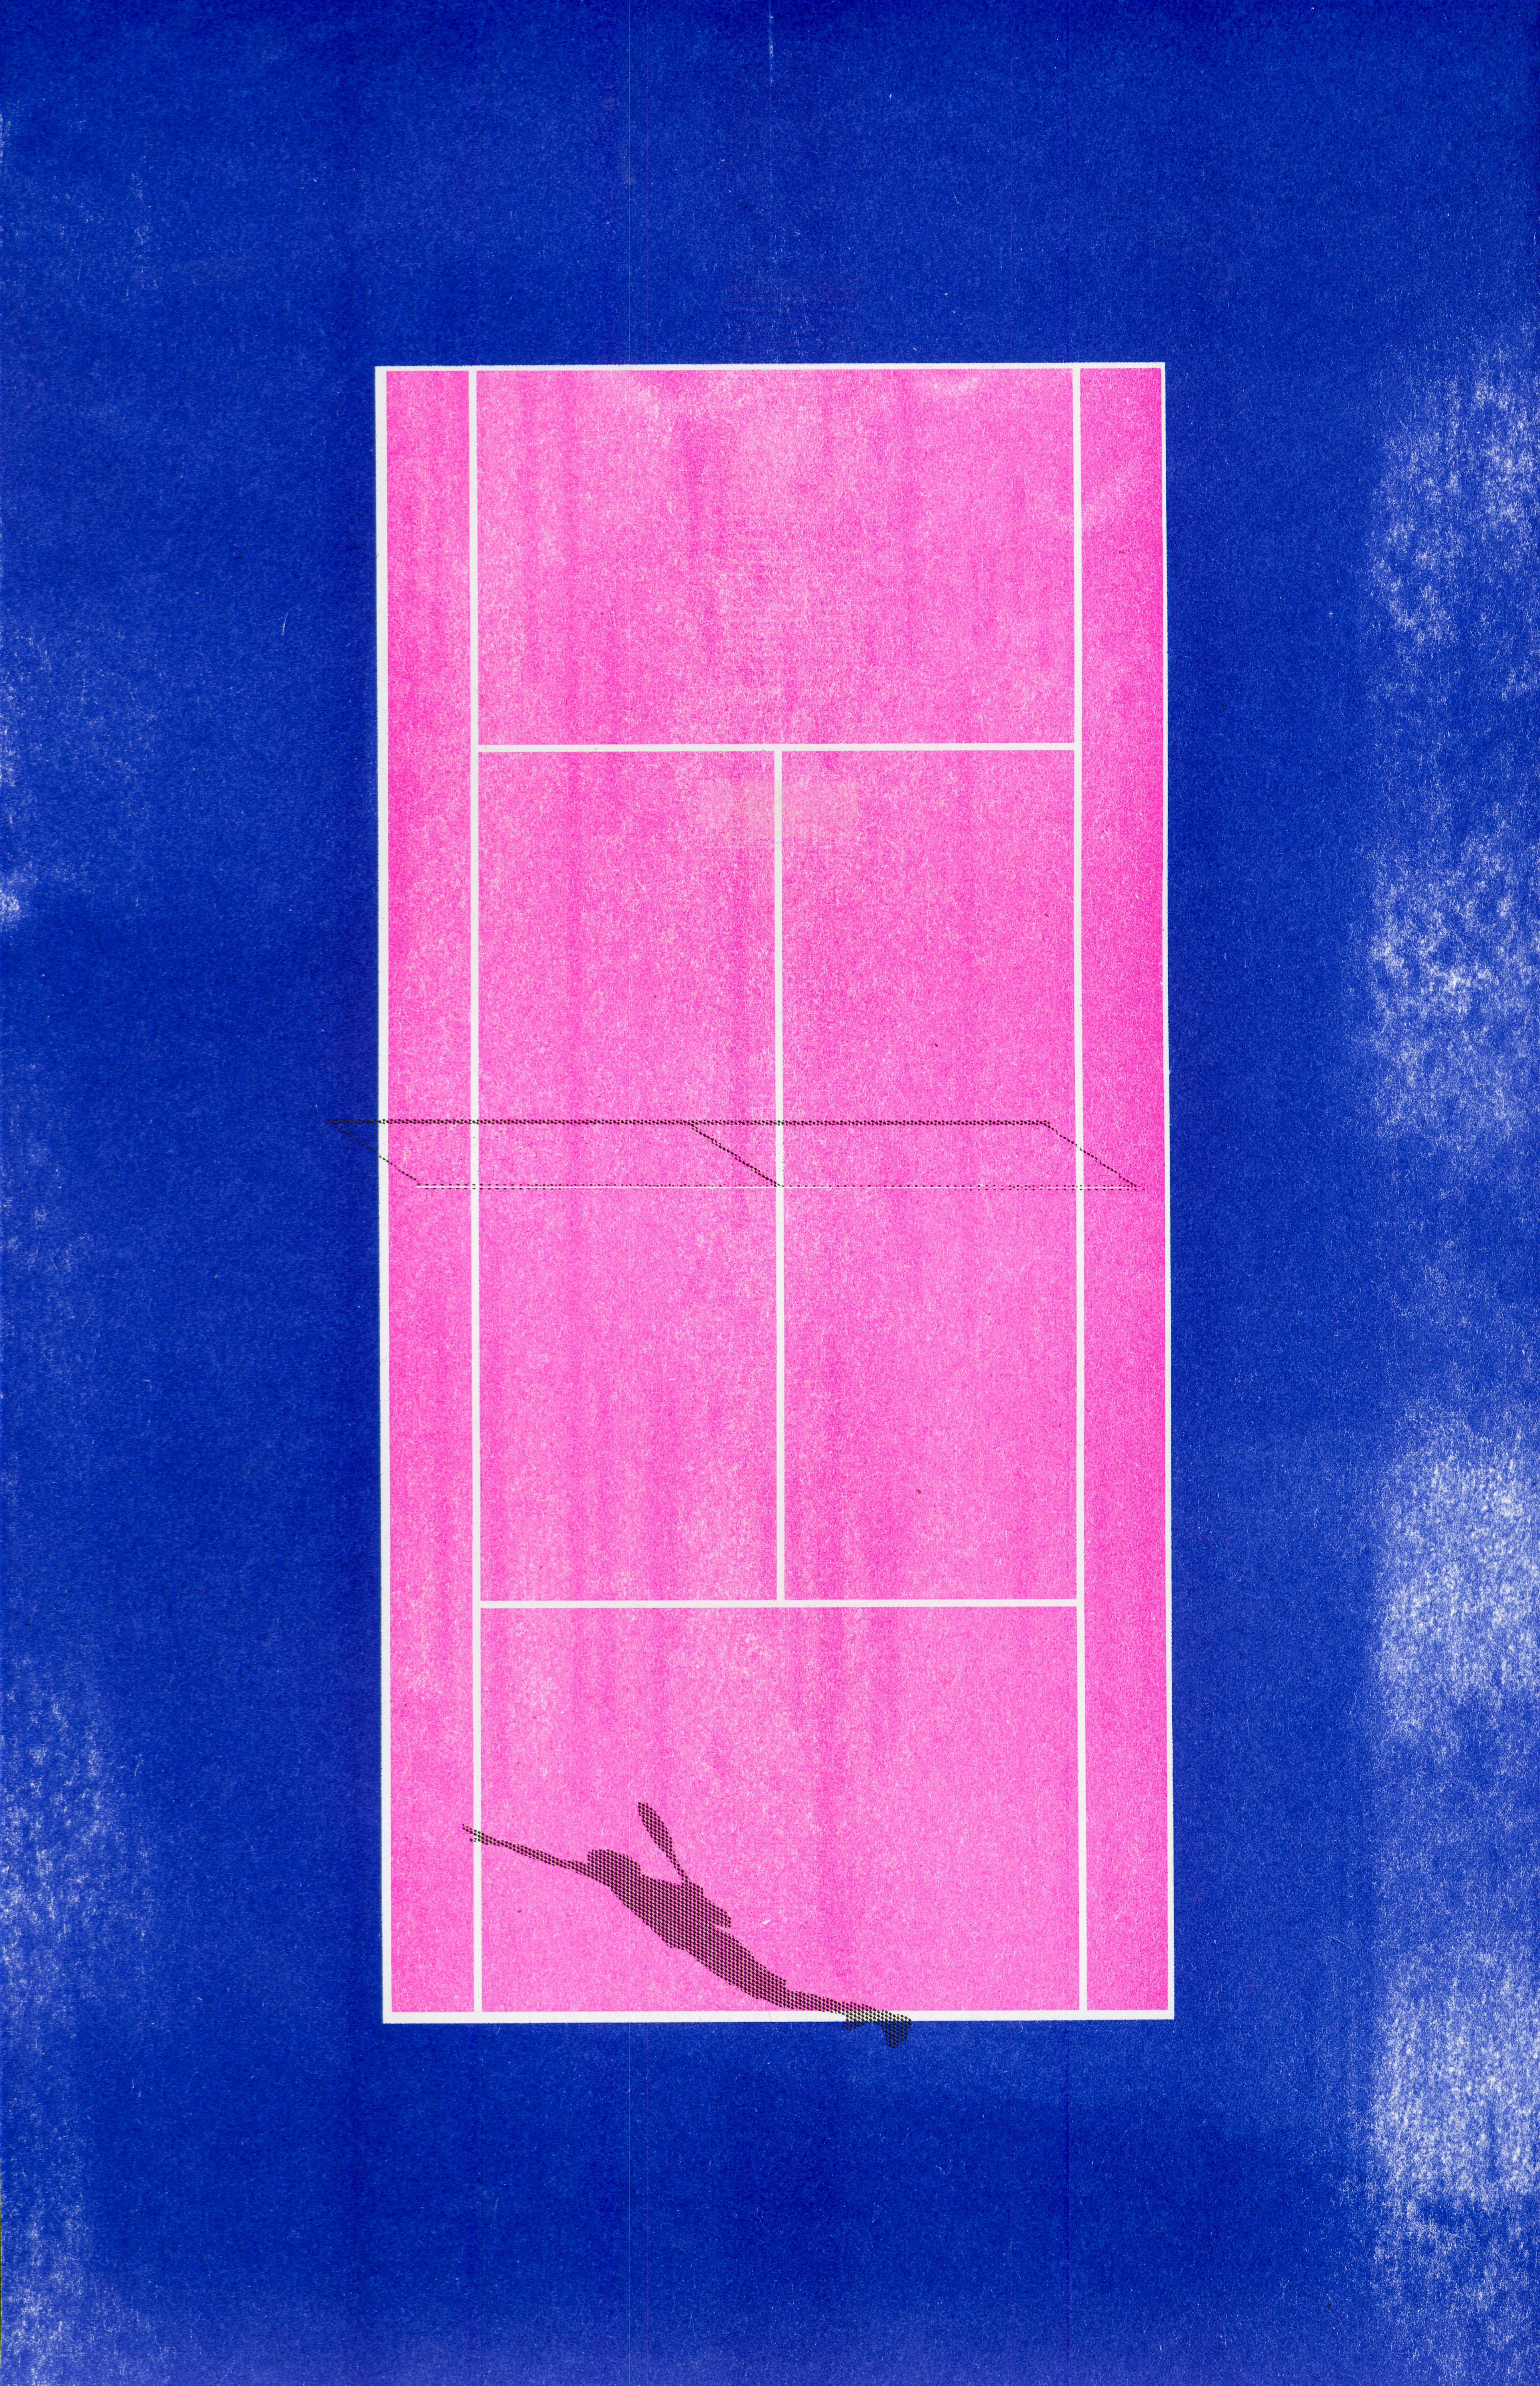 Blue and pink riso print of a birds eye view of a tennis court with shadow of players